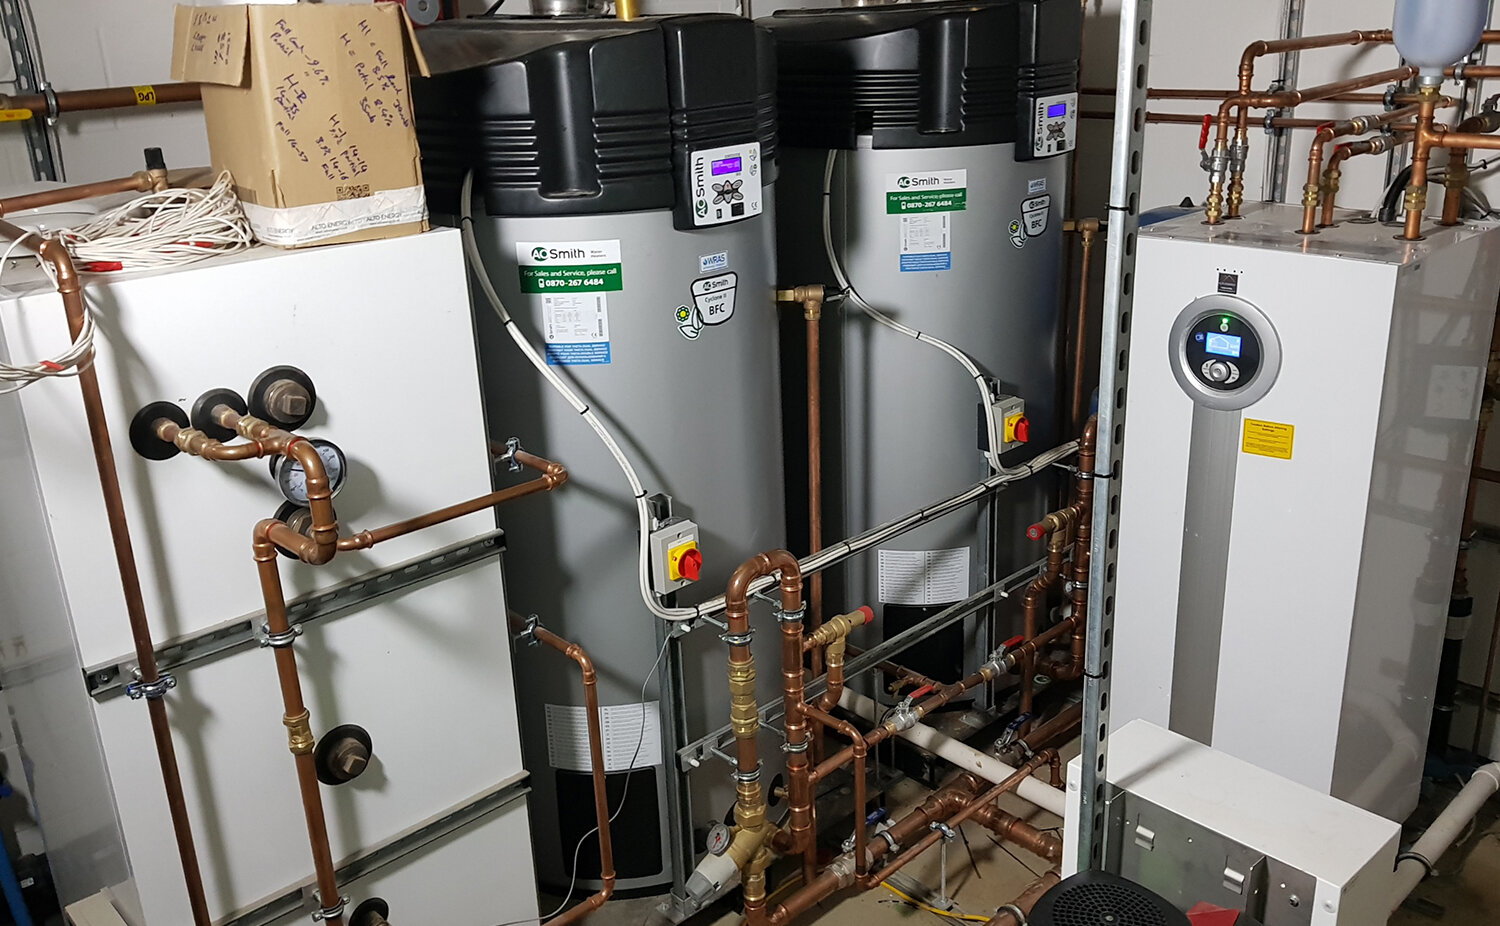 Heating and Hot Water Provided by IVE Ground Source Heat Pump